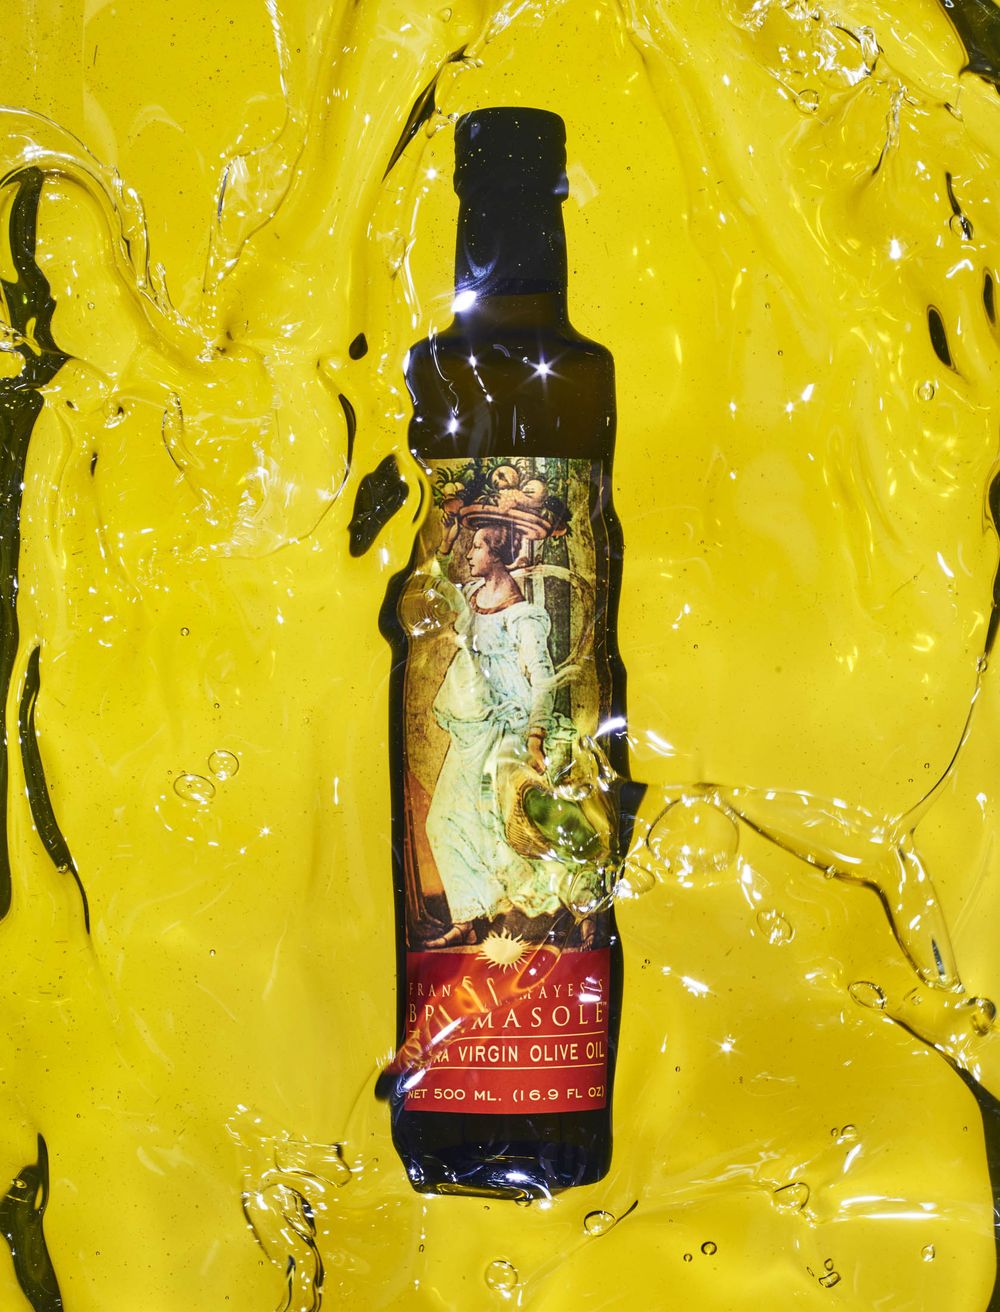 Bloomberg: This $25 Olive Oil Is the Only Bottle You'll Ever Need - Bramasole Olive Oil